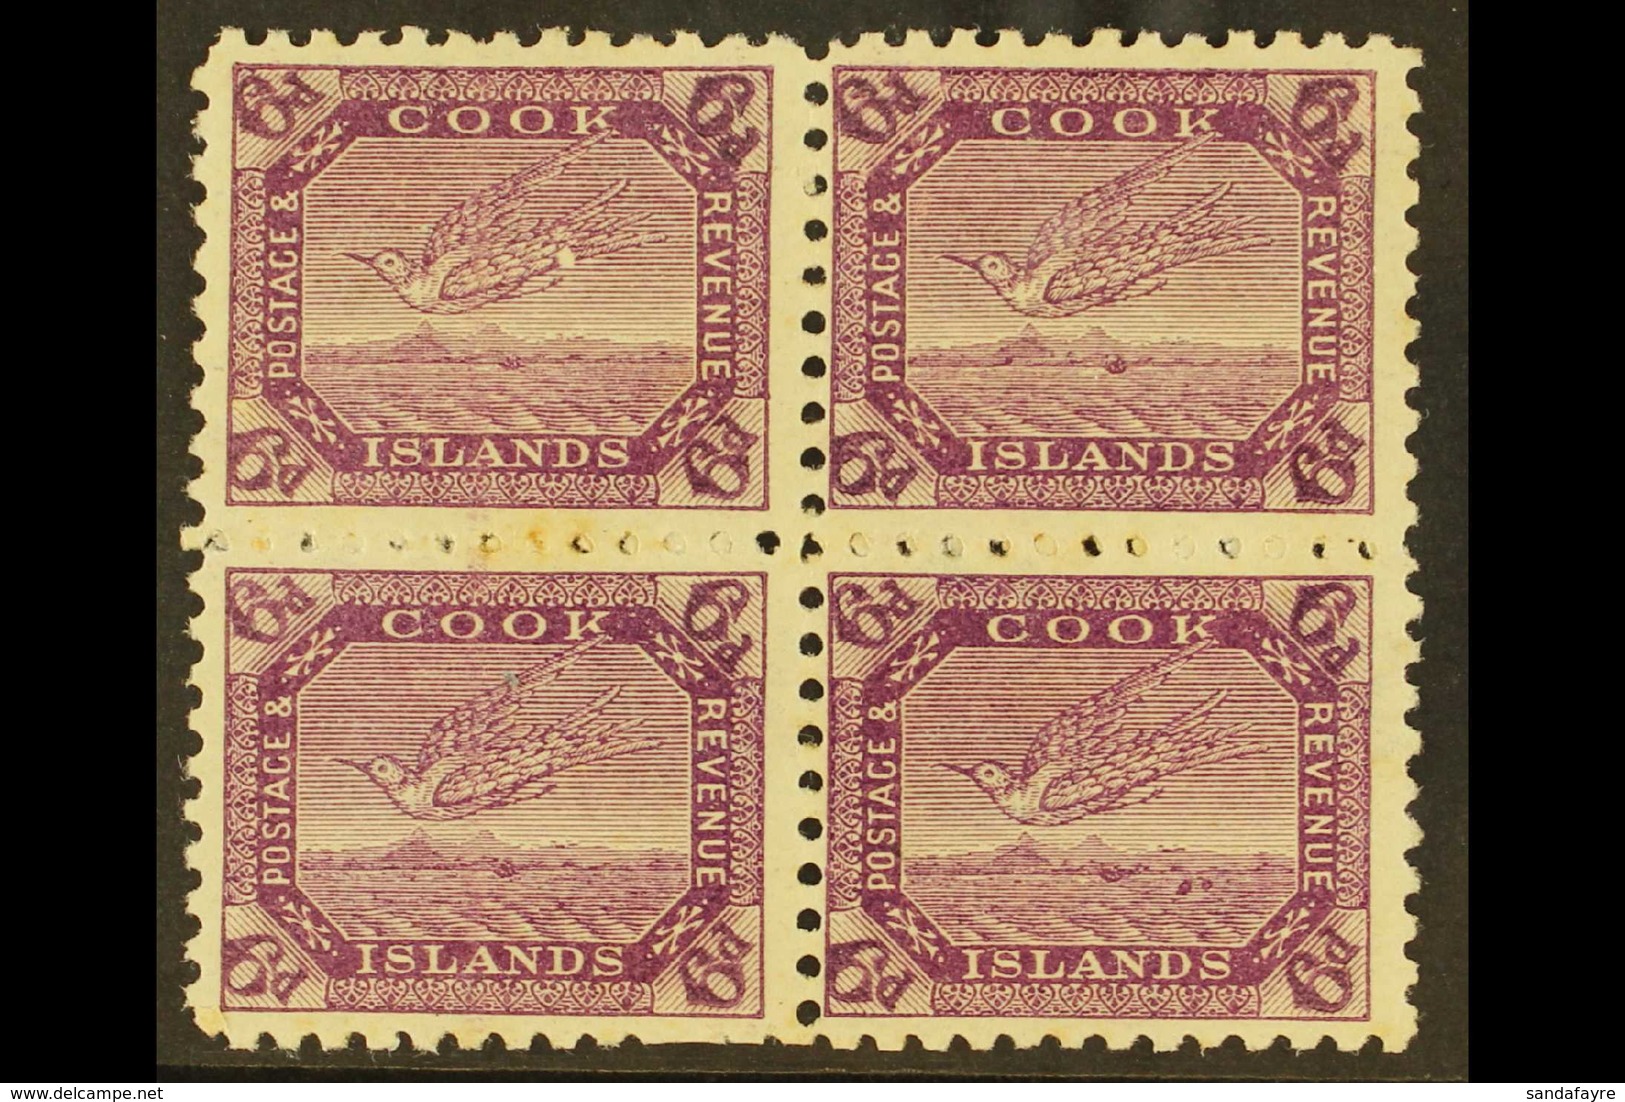 1893-1900 6d Bright Purple Tern, SG 18a, Mint Block Of Four With Positions 1/3 White Spot On Wing And 2/4 Two Coloured S - Cook Islands